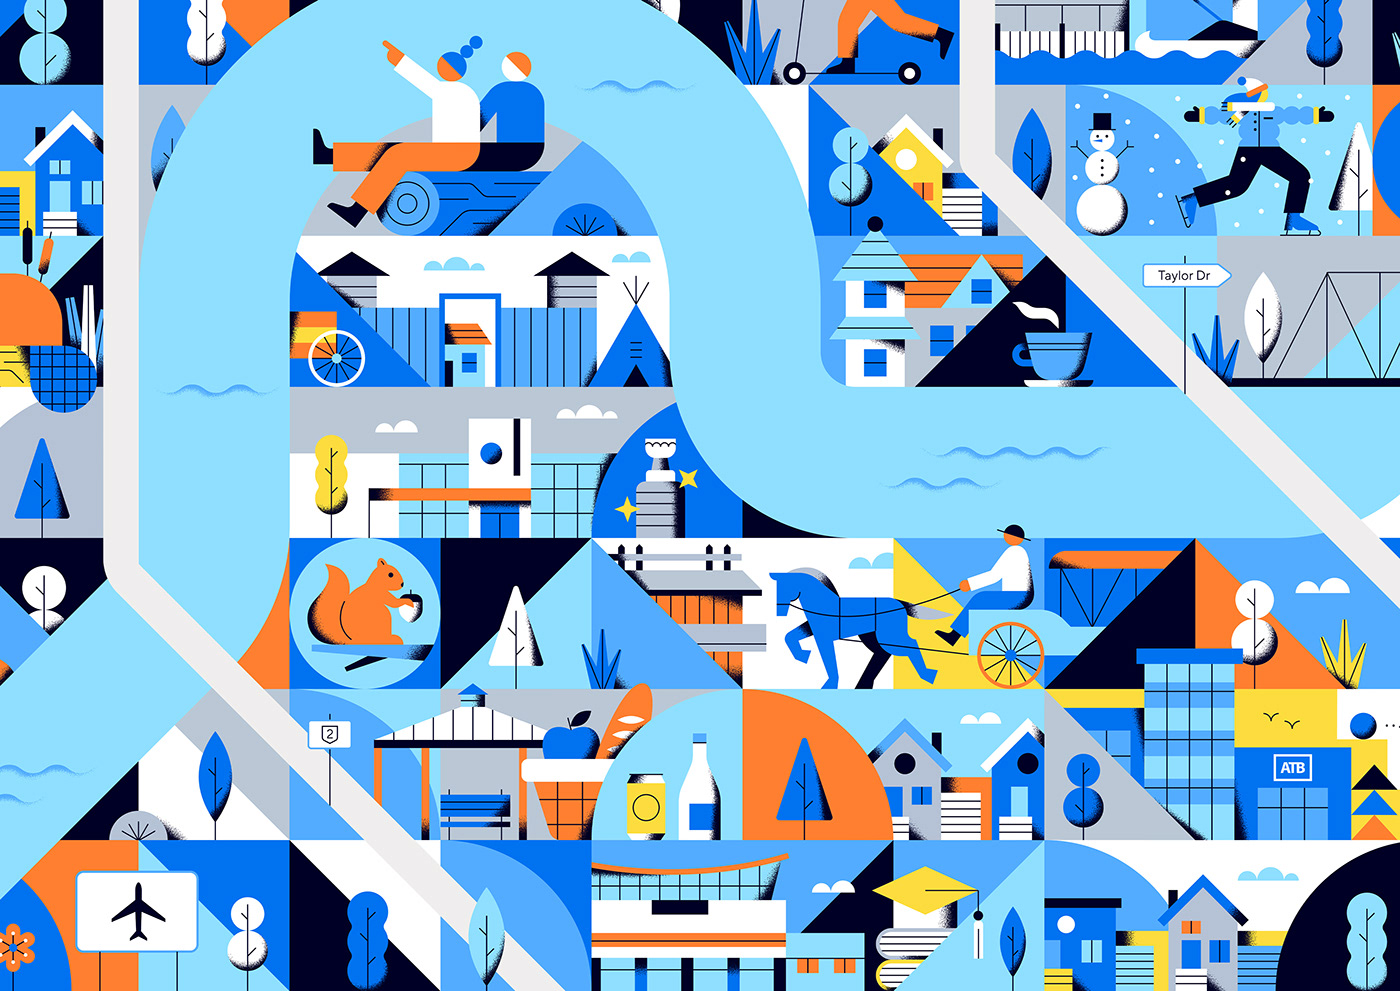 city map Mural geometric abstract flat vector animals people ILLUSTRATION 